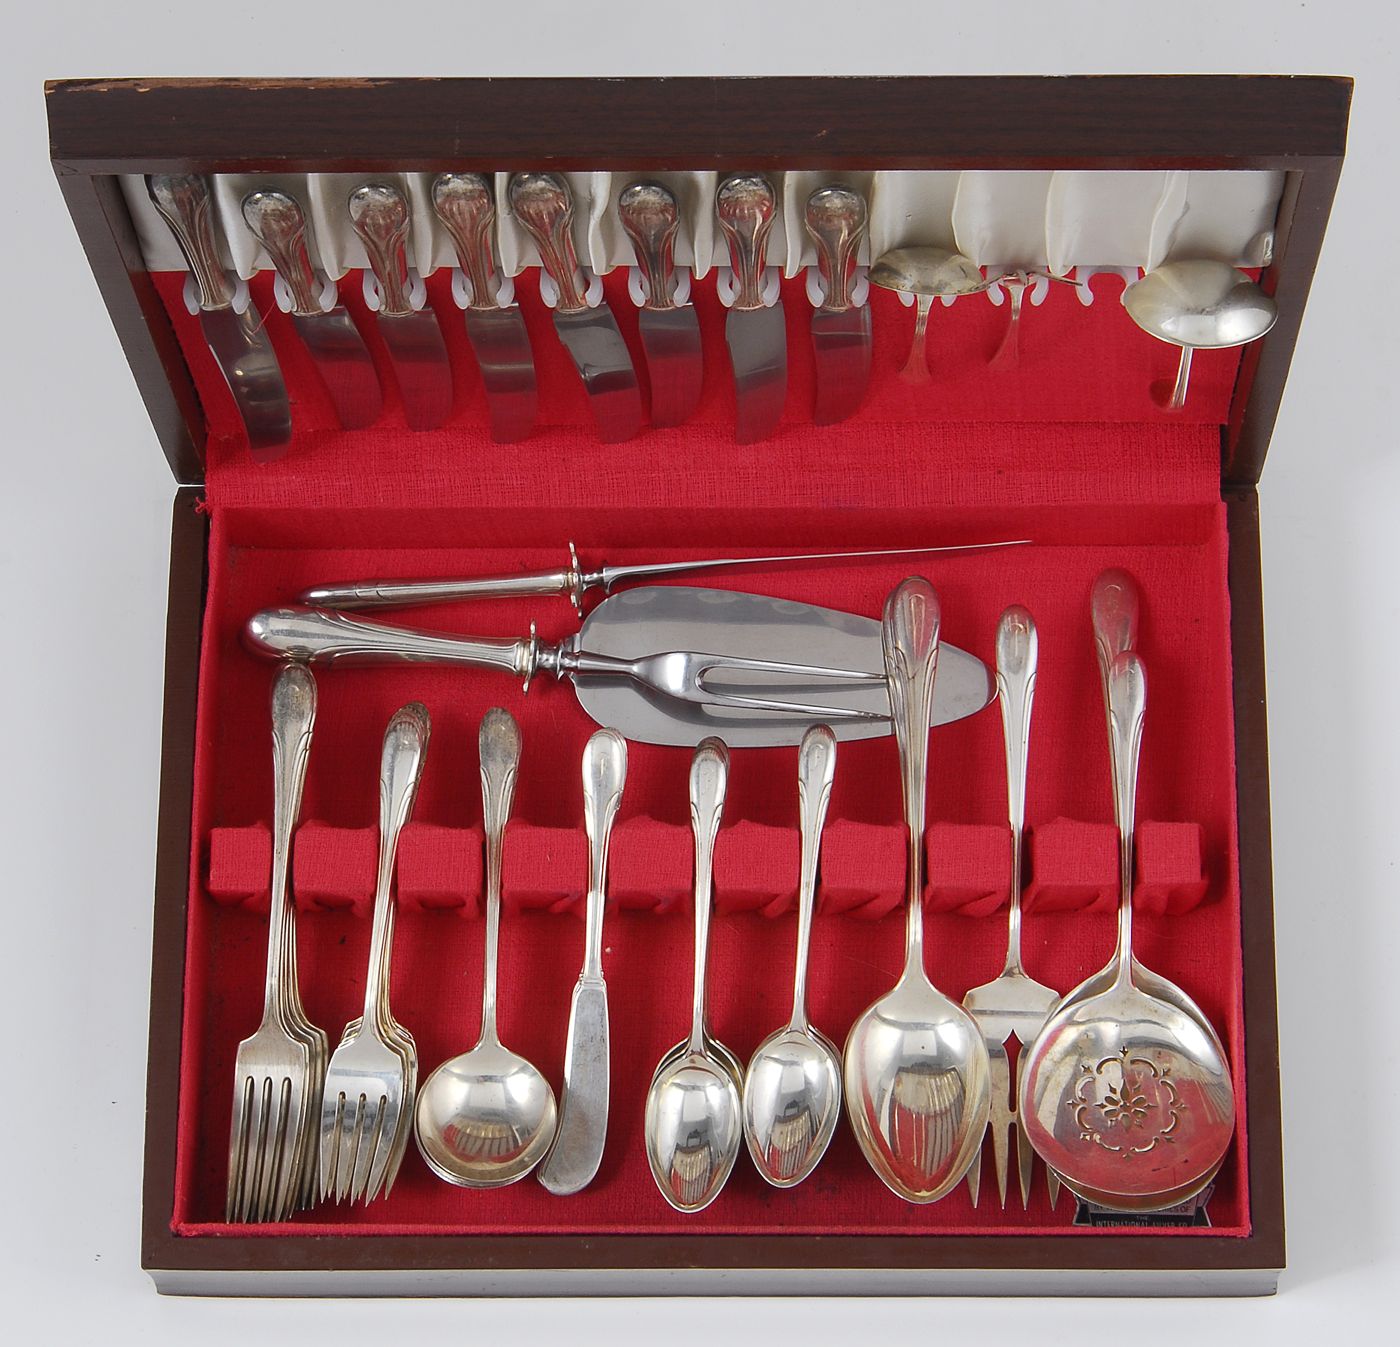 TOWLE MFG. CO. STERLING SILVER FLATWARE